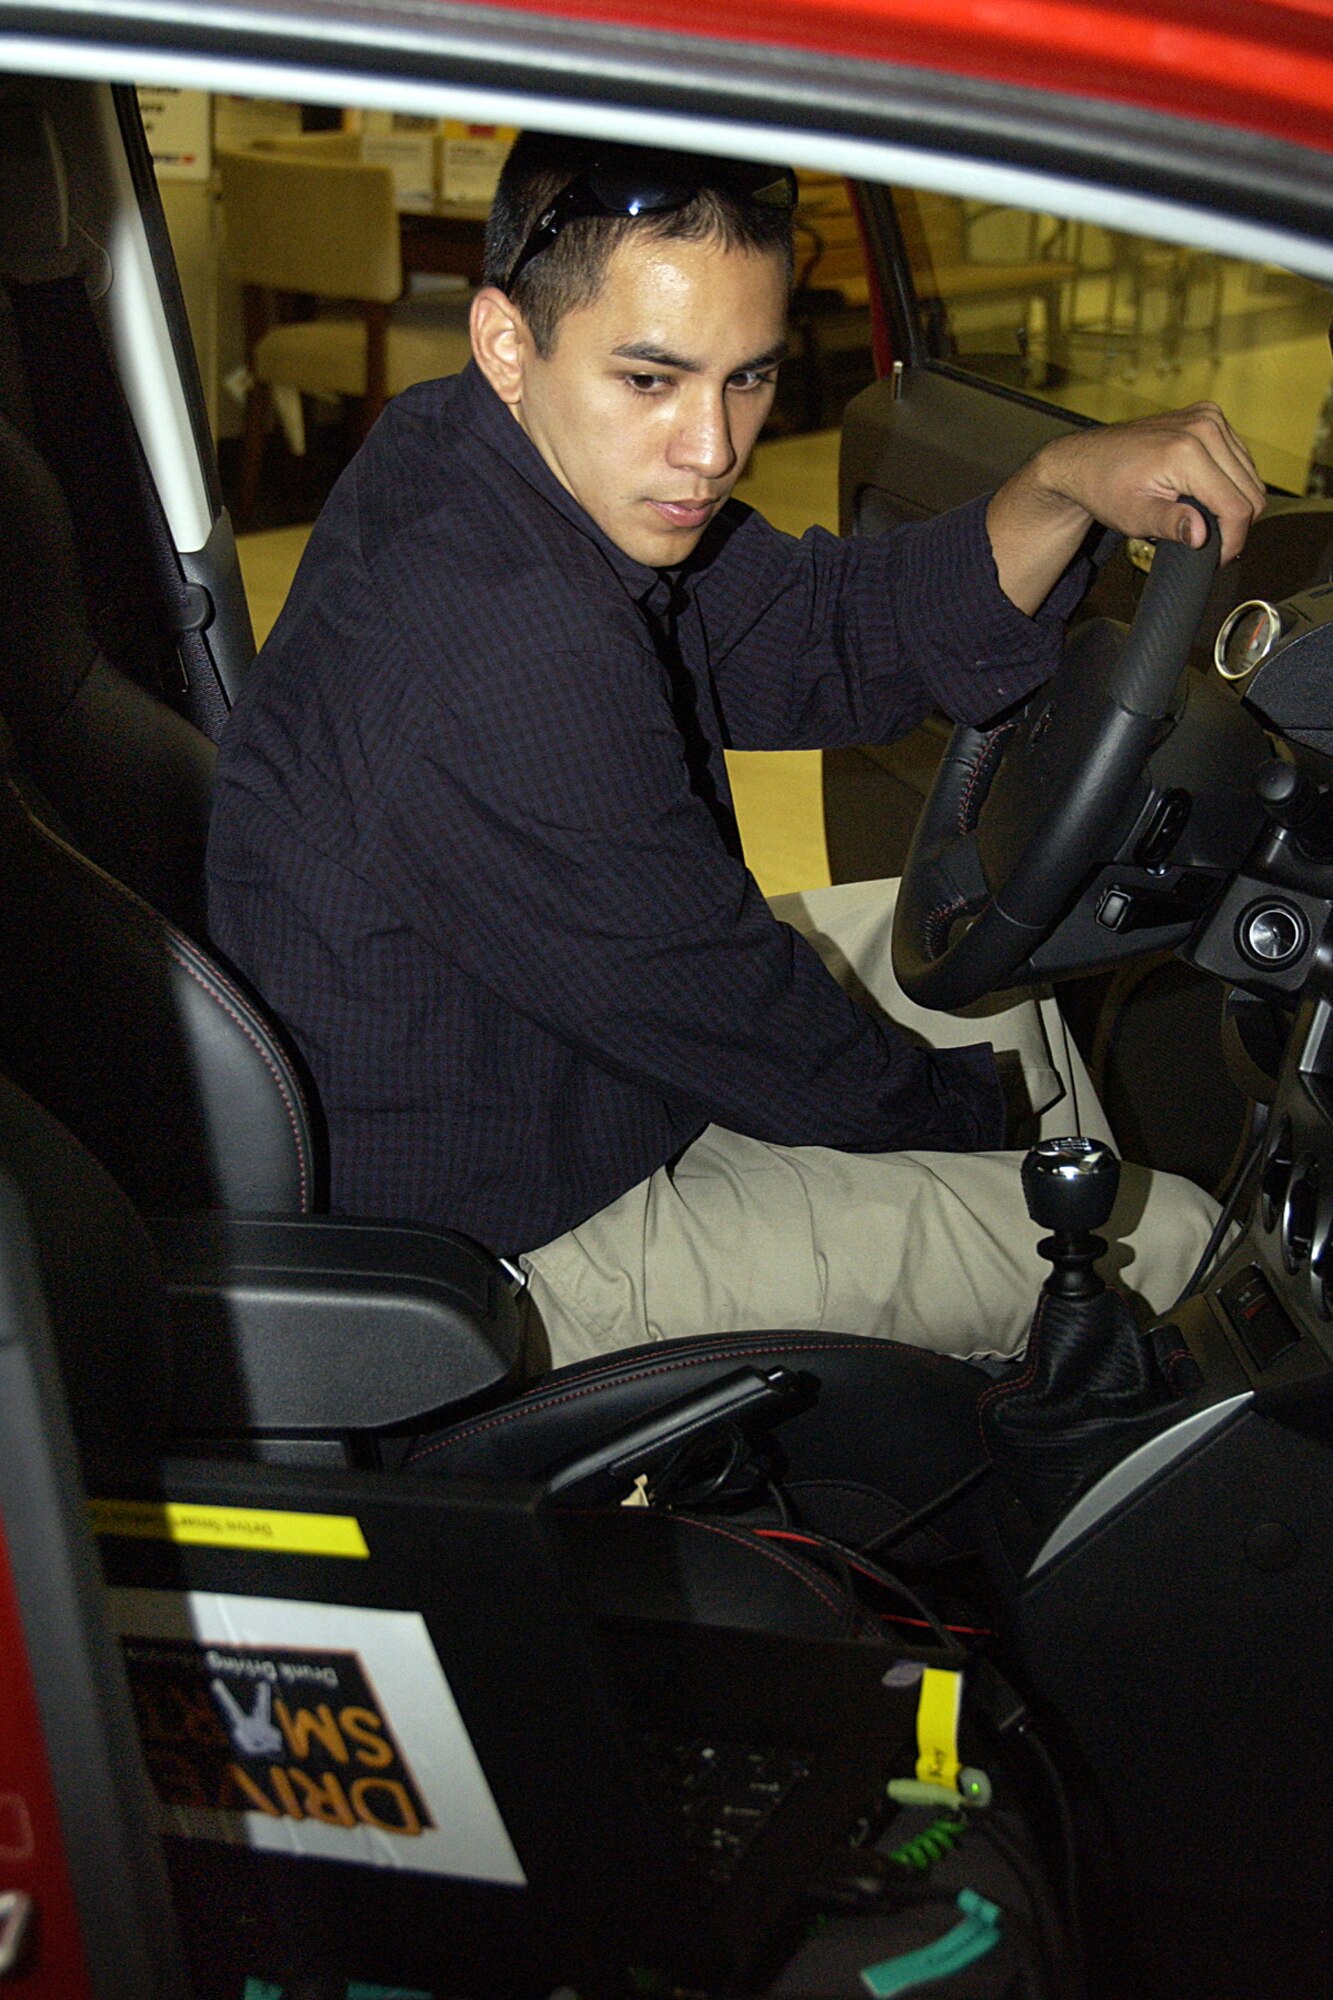 ANDERSEN AIR FORCE BASE, Guam -- Garret Lord, New Exchange Car Sales
Chrysler sales agent, calibrates the Drive Smart DUI simulator at the base
exchange March 10. The $40,000 simulator is a virtual interactive experience
that mimics the dangers of driving under the influence of alcohol. (U.S. Air
Force photo by Airman Carissa Wolff)
